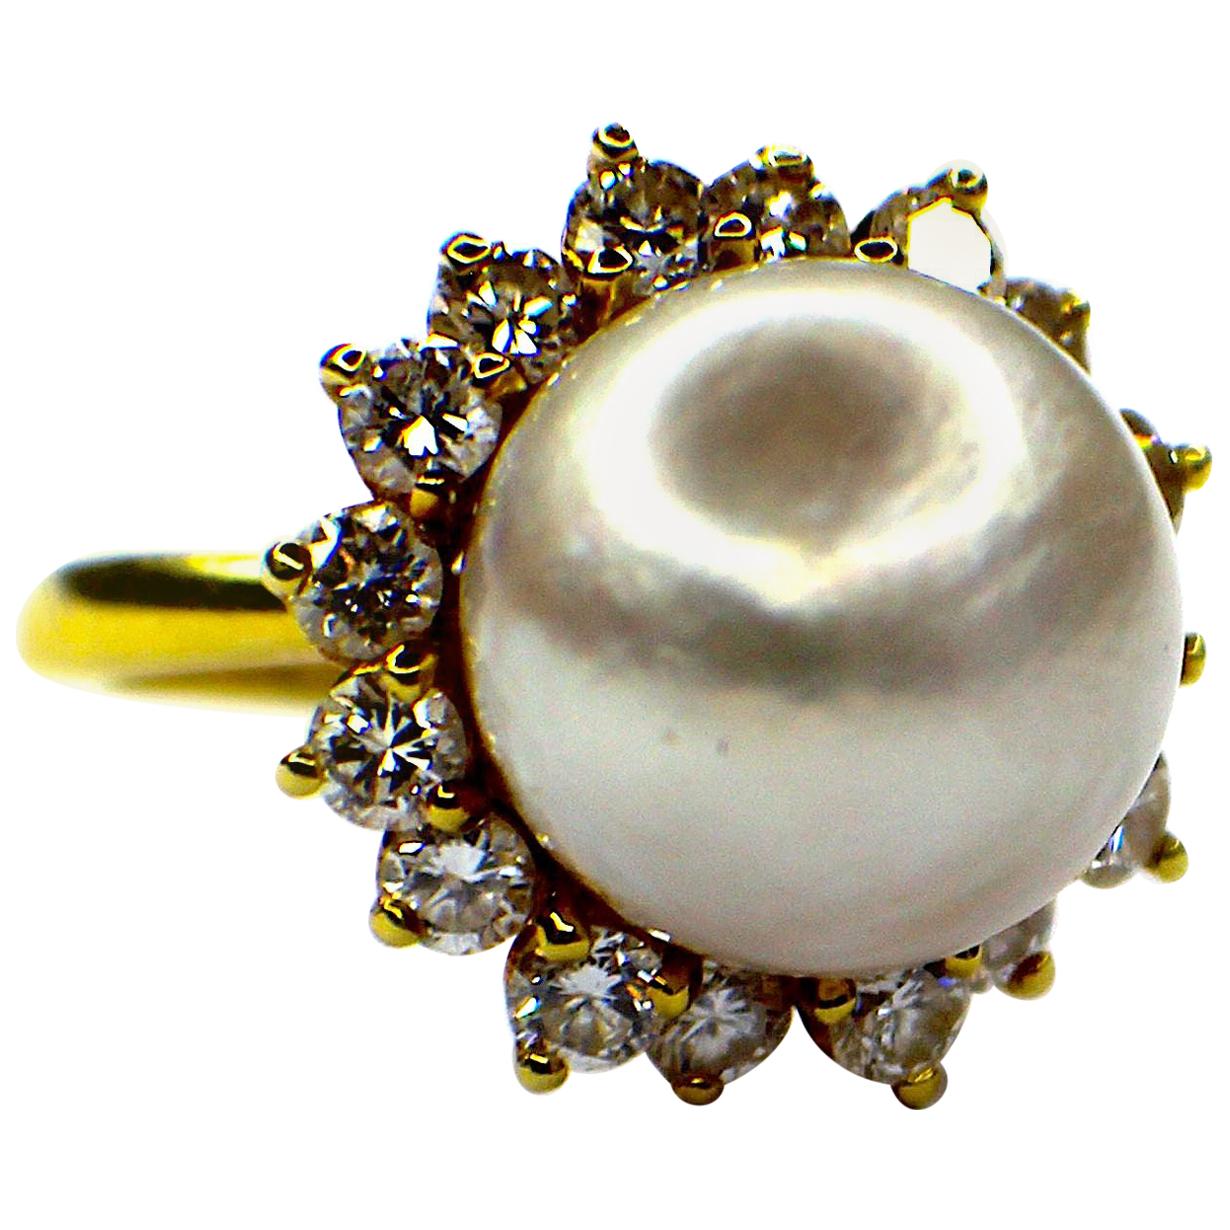 GEMOLITHOS, Cultured South Seas Pearl and Diamond Ring, 1980s